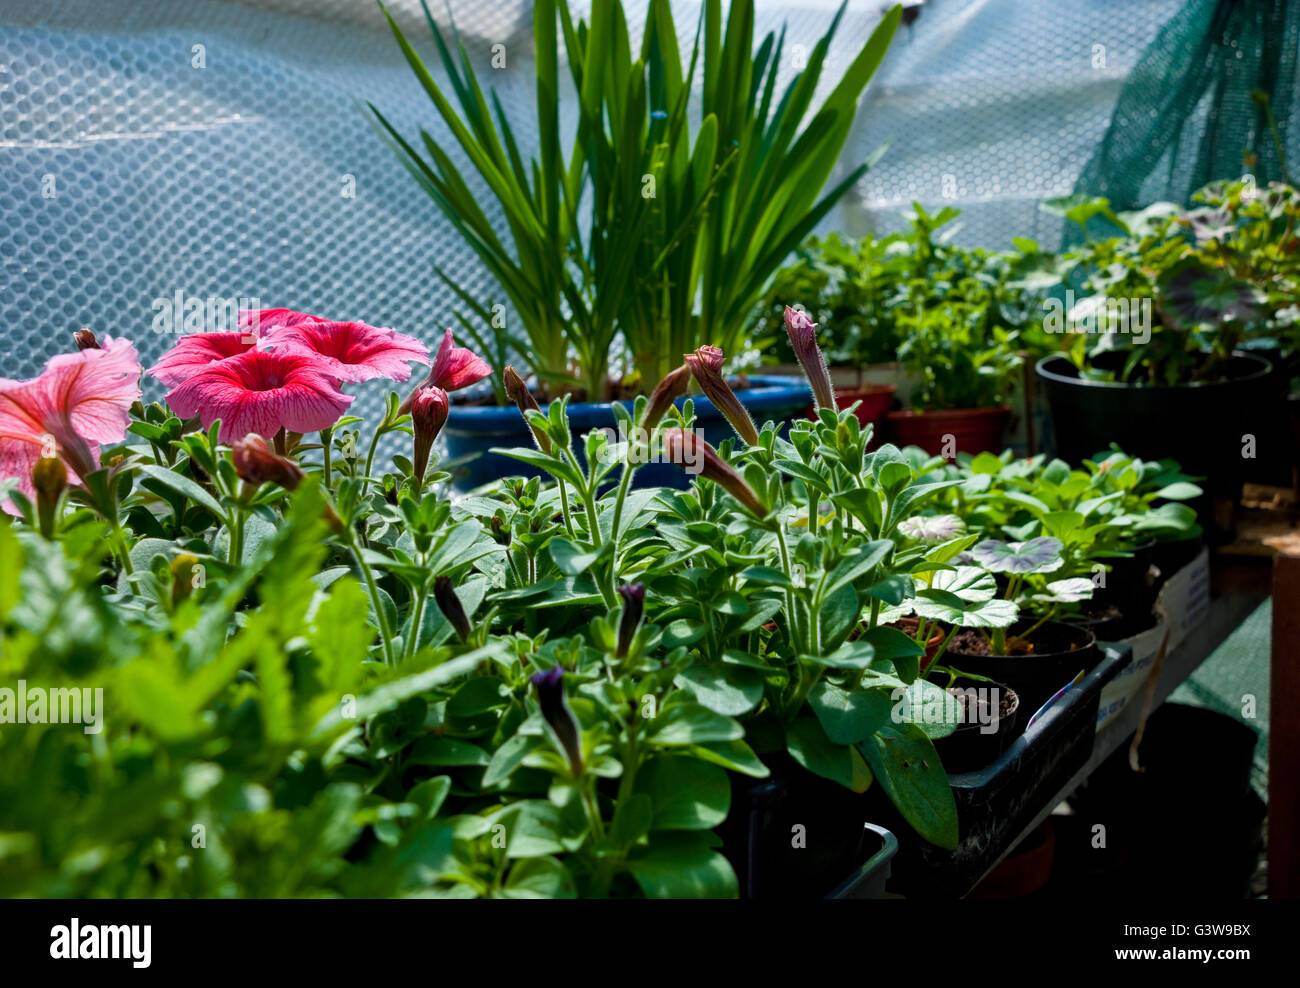 Tender young petunia petunias and verbena plants growing in a greenhouse in spring England UK United Kingdom GB Great Britain Stock Photo